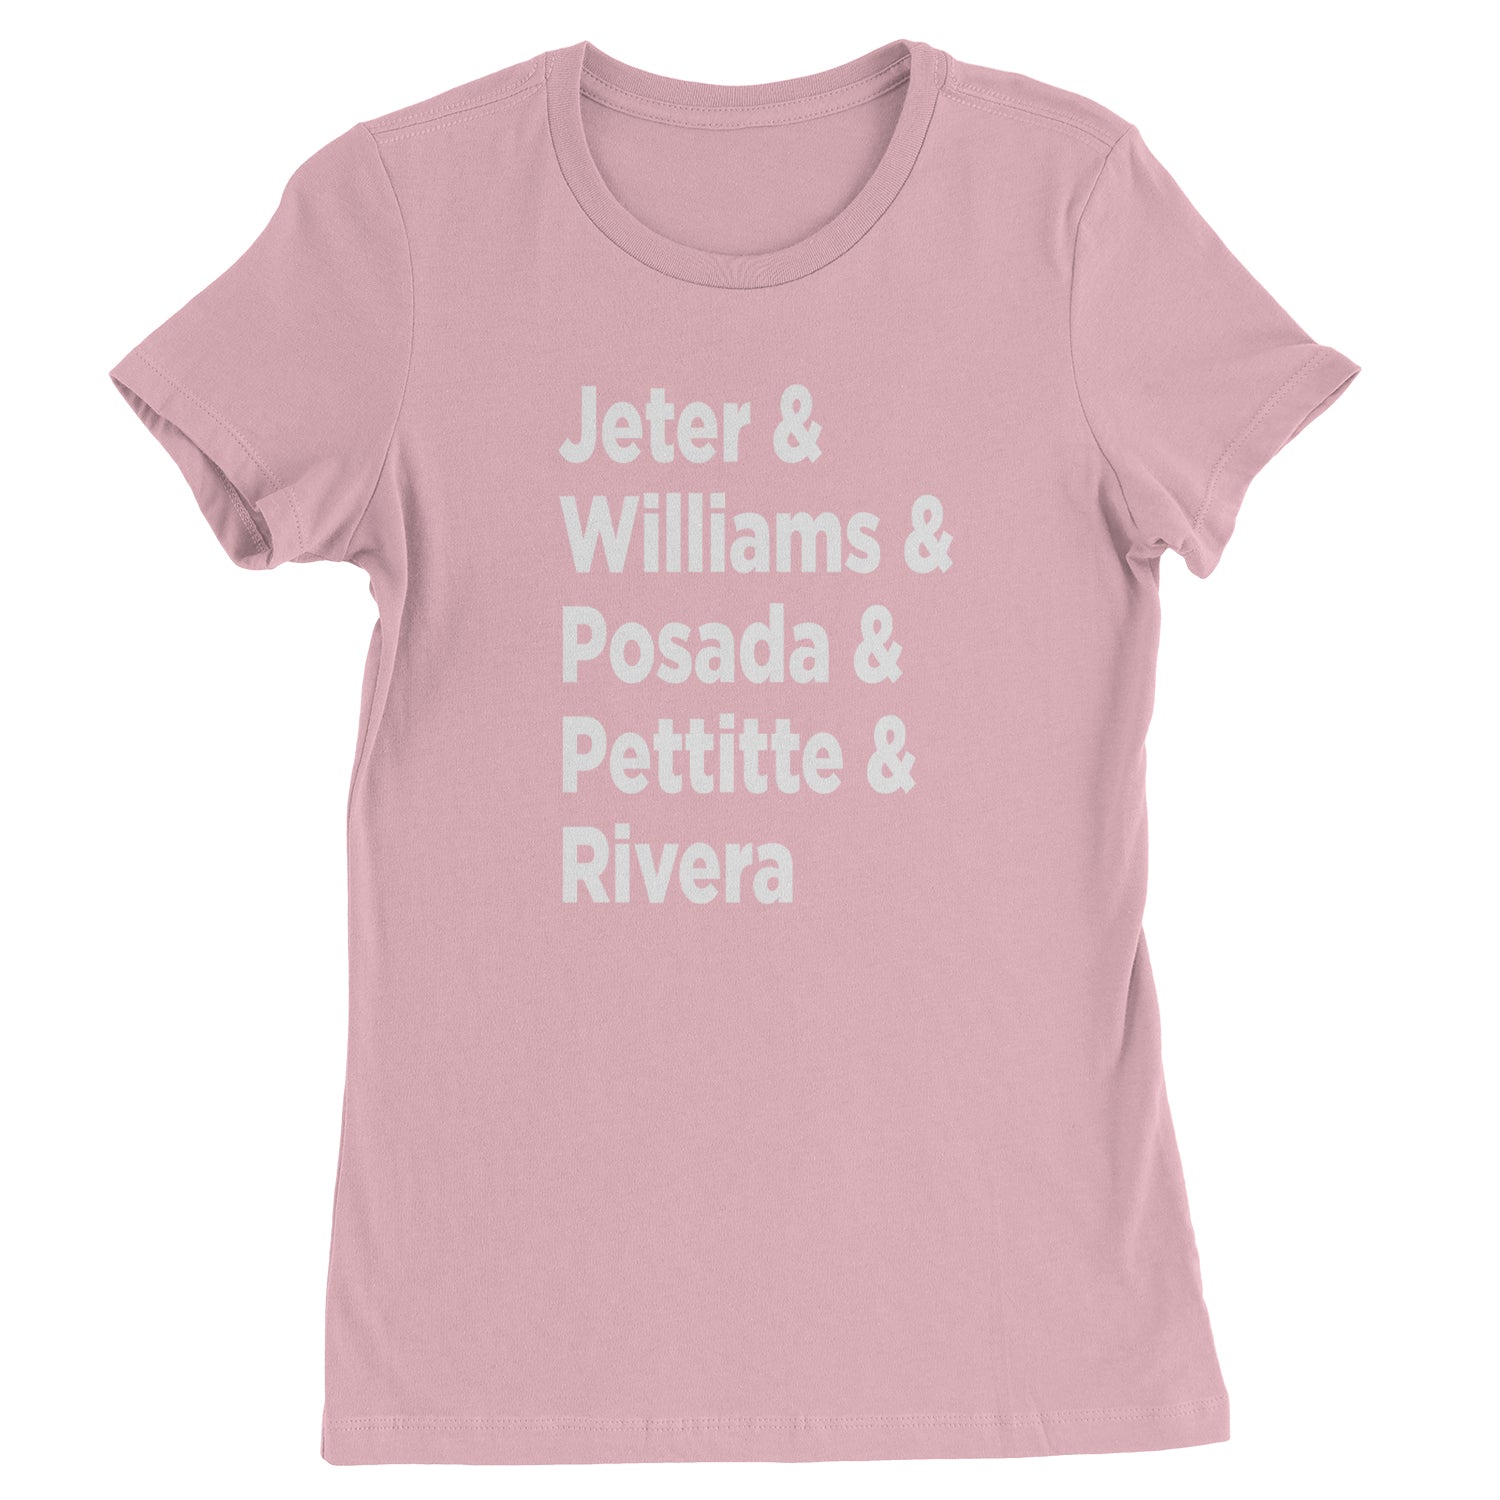 Jeter and Williams and Posada and Pettitte and Rivera Womens T-shirt baseball, comes, here, judge, the by Expression Tees